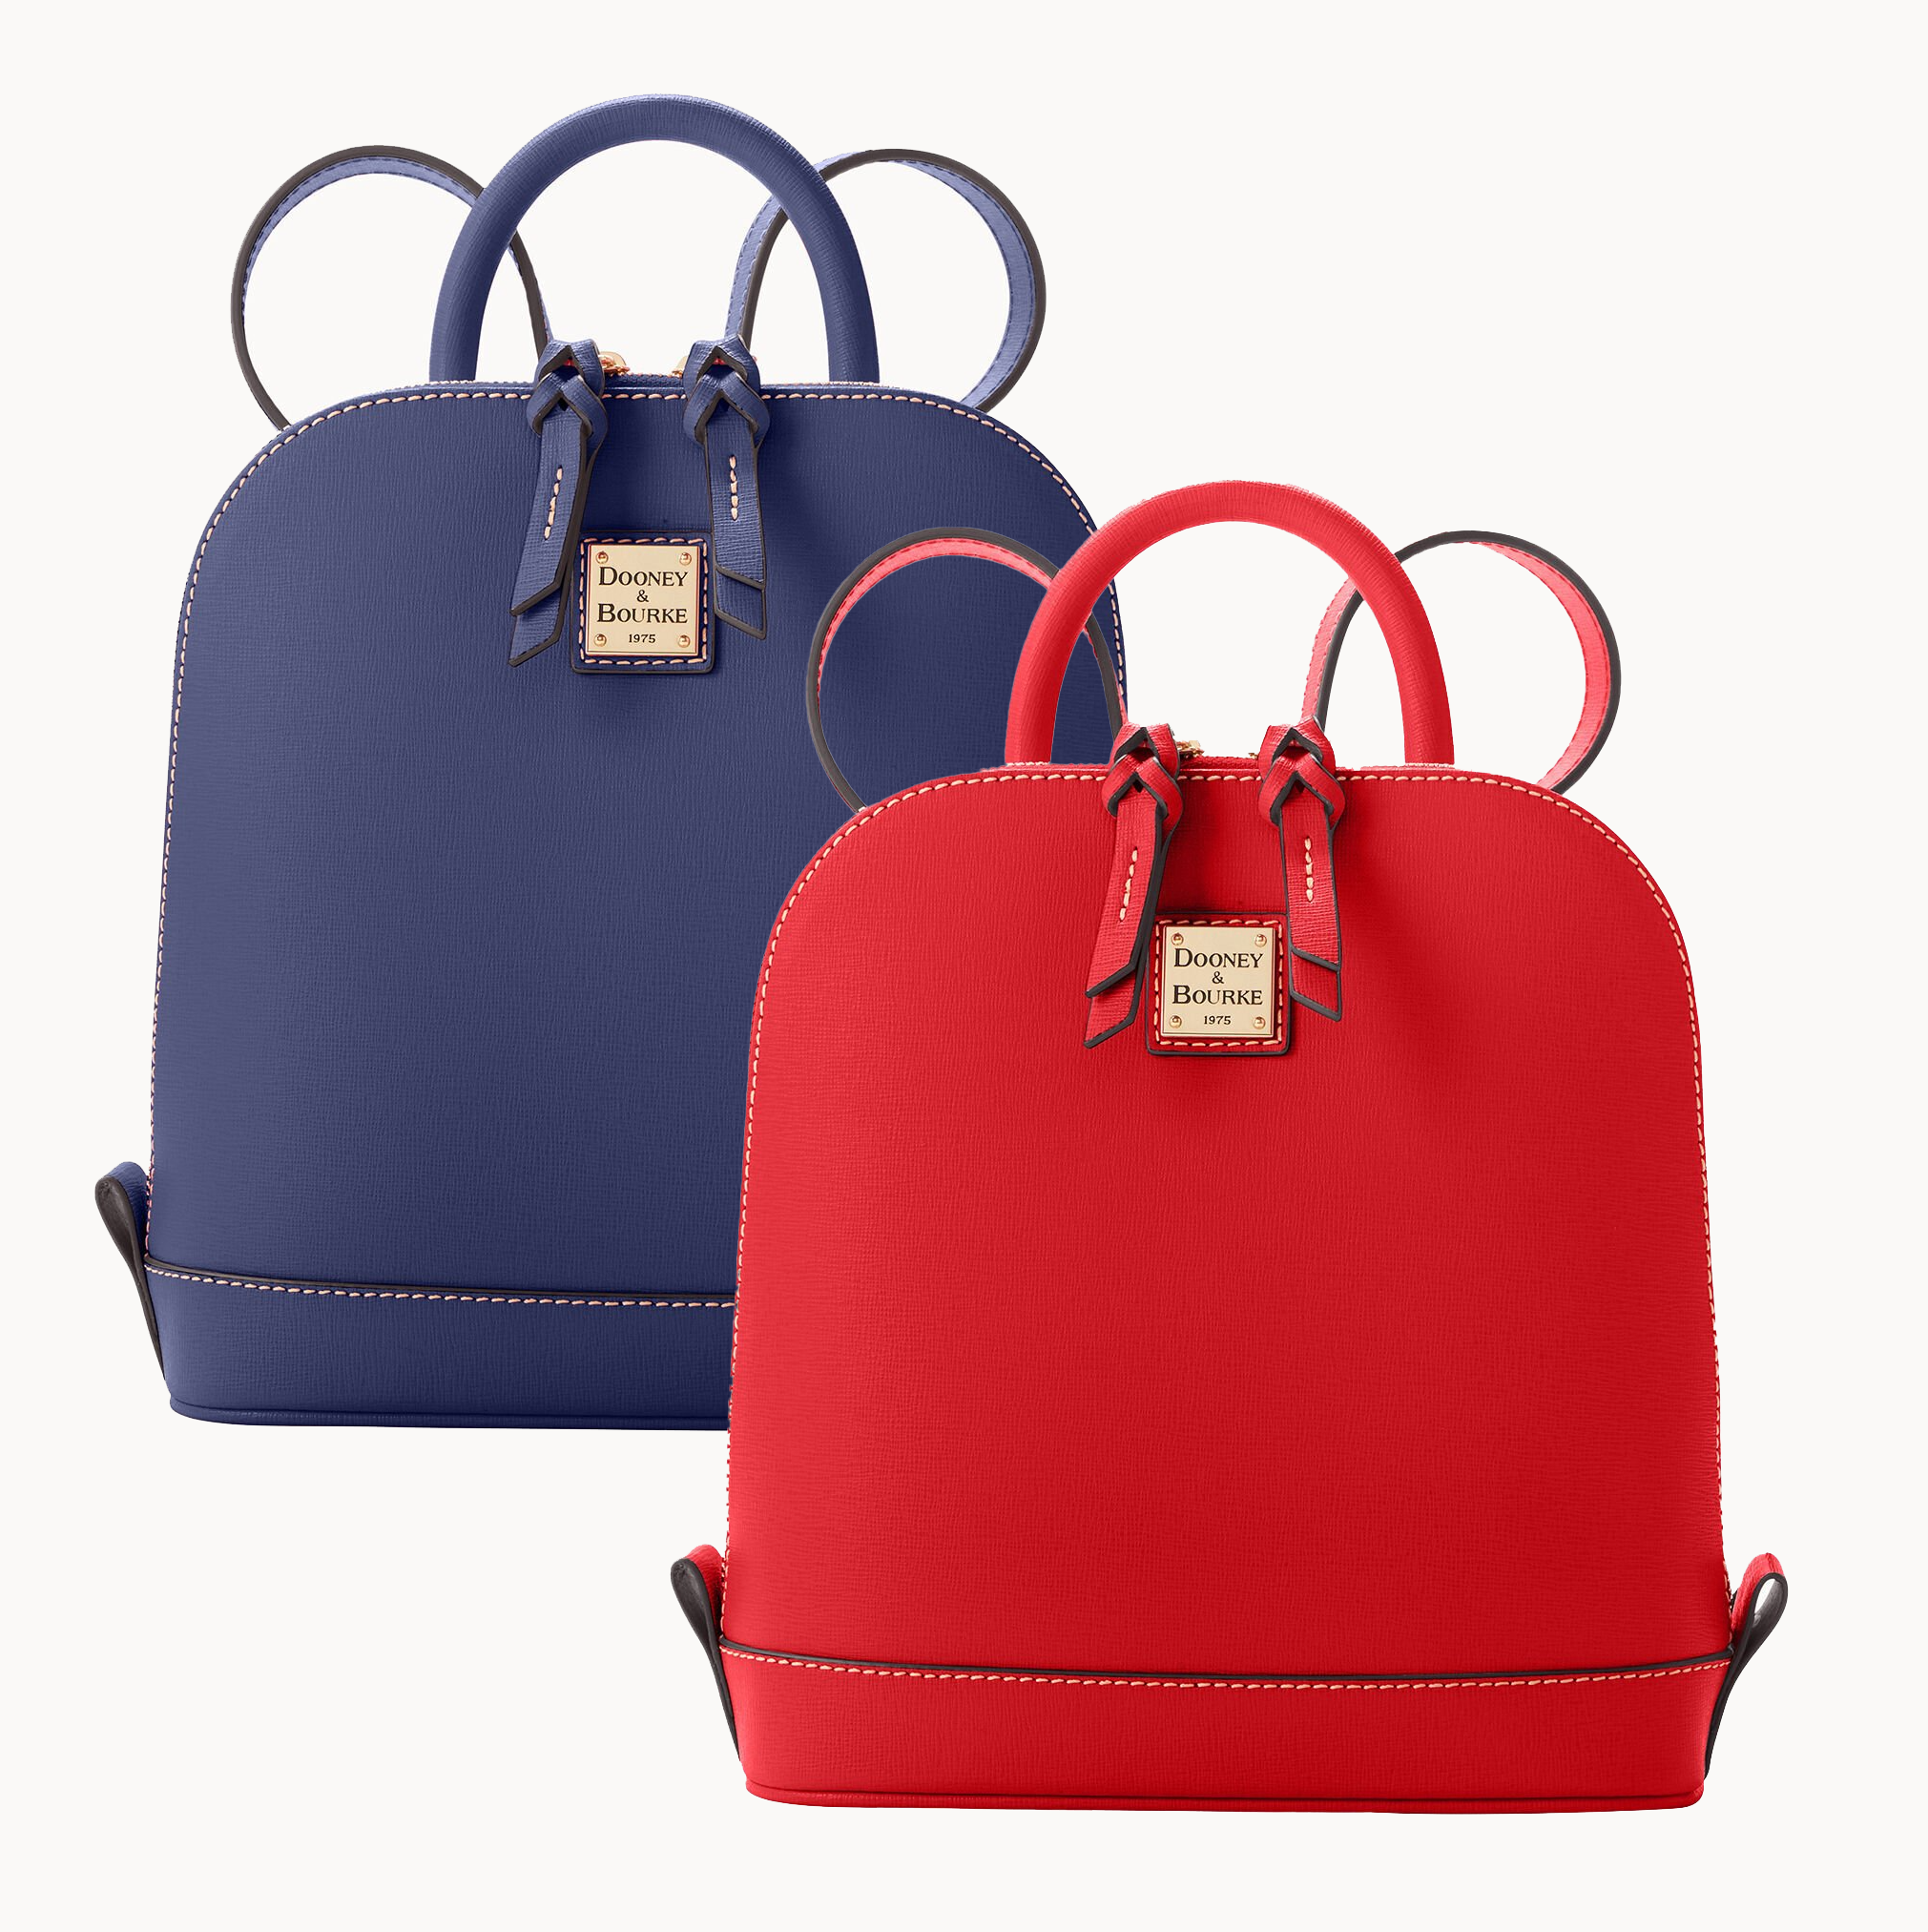 Two leather backpacks, one blue and one red, with top handles and branding tags.